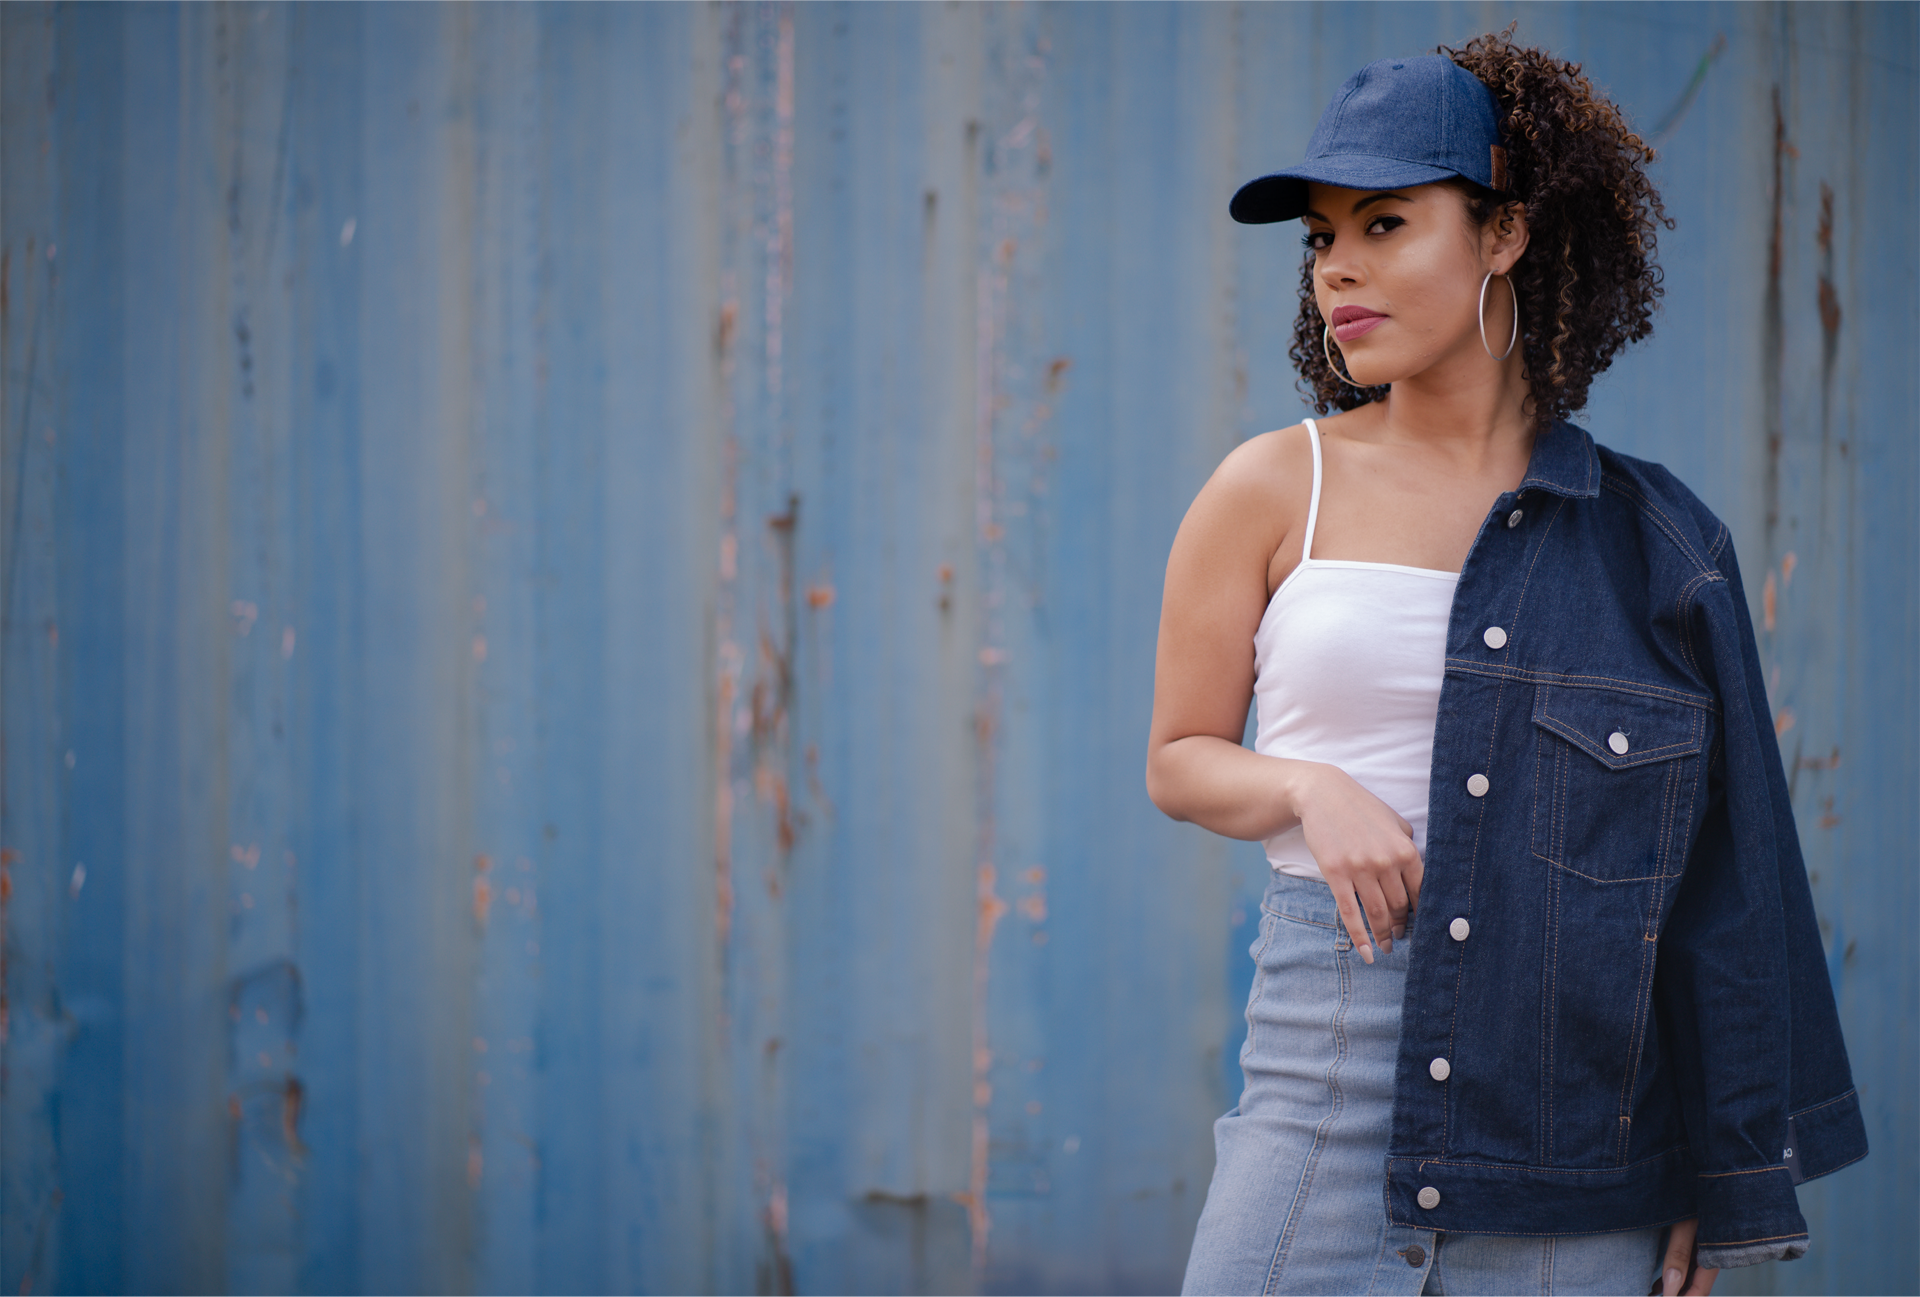 Denim Satin Lined Culture Cap on Curly Hair